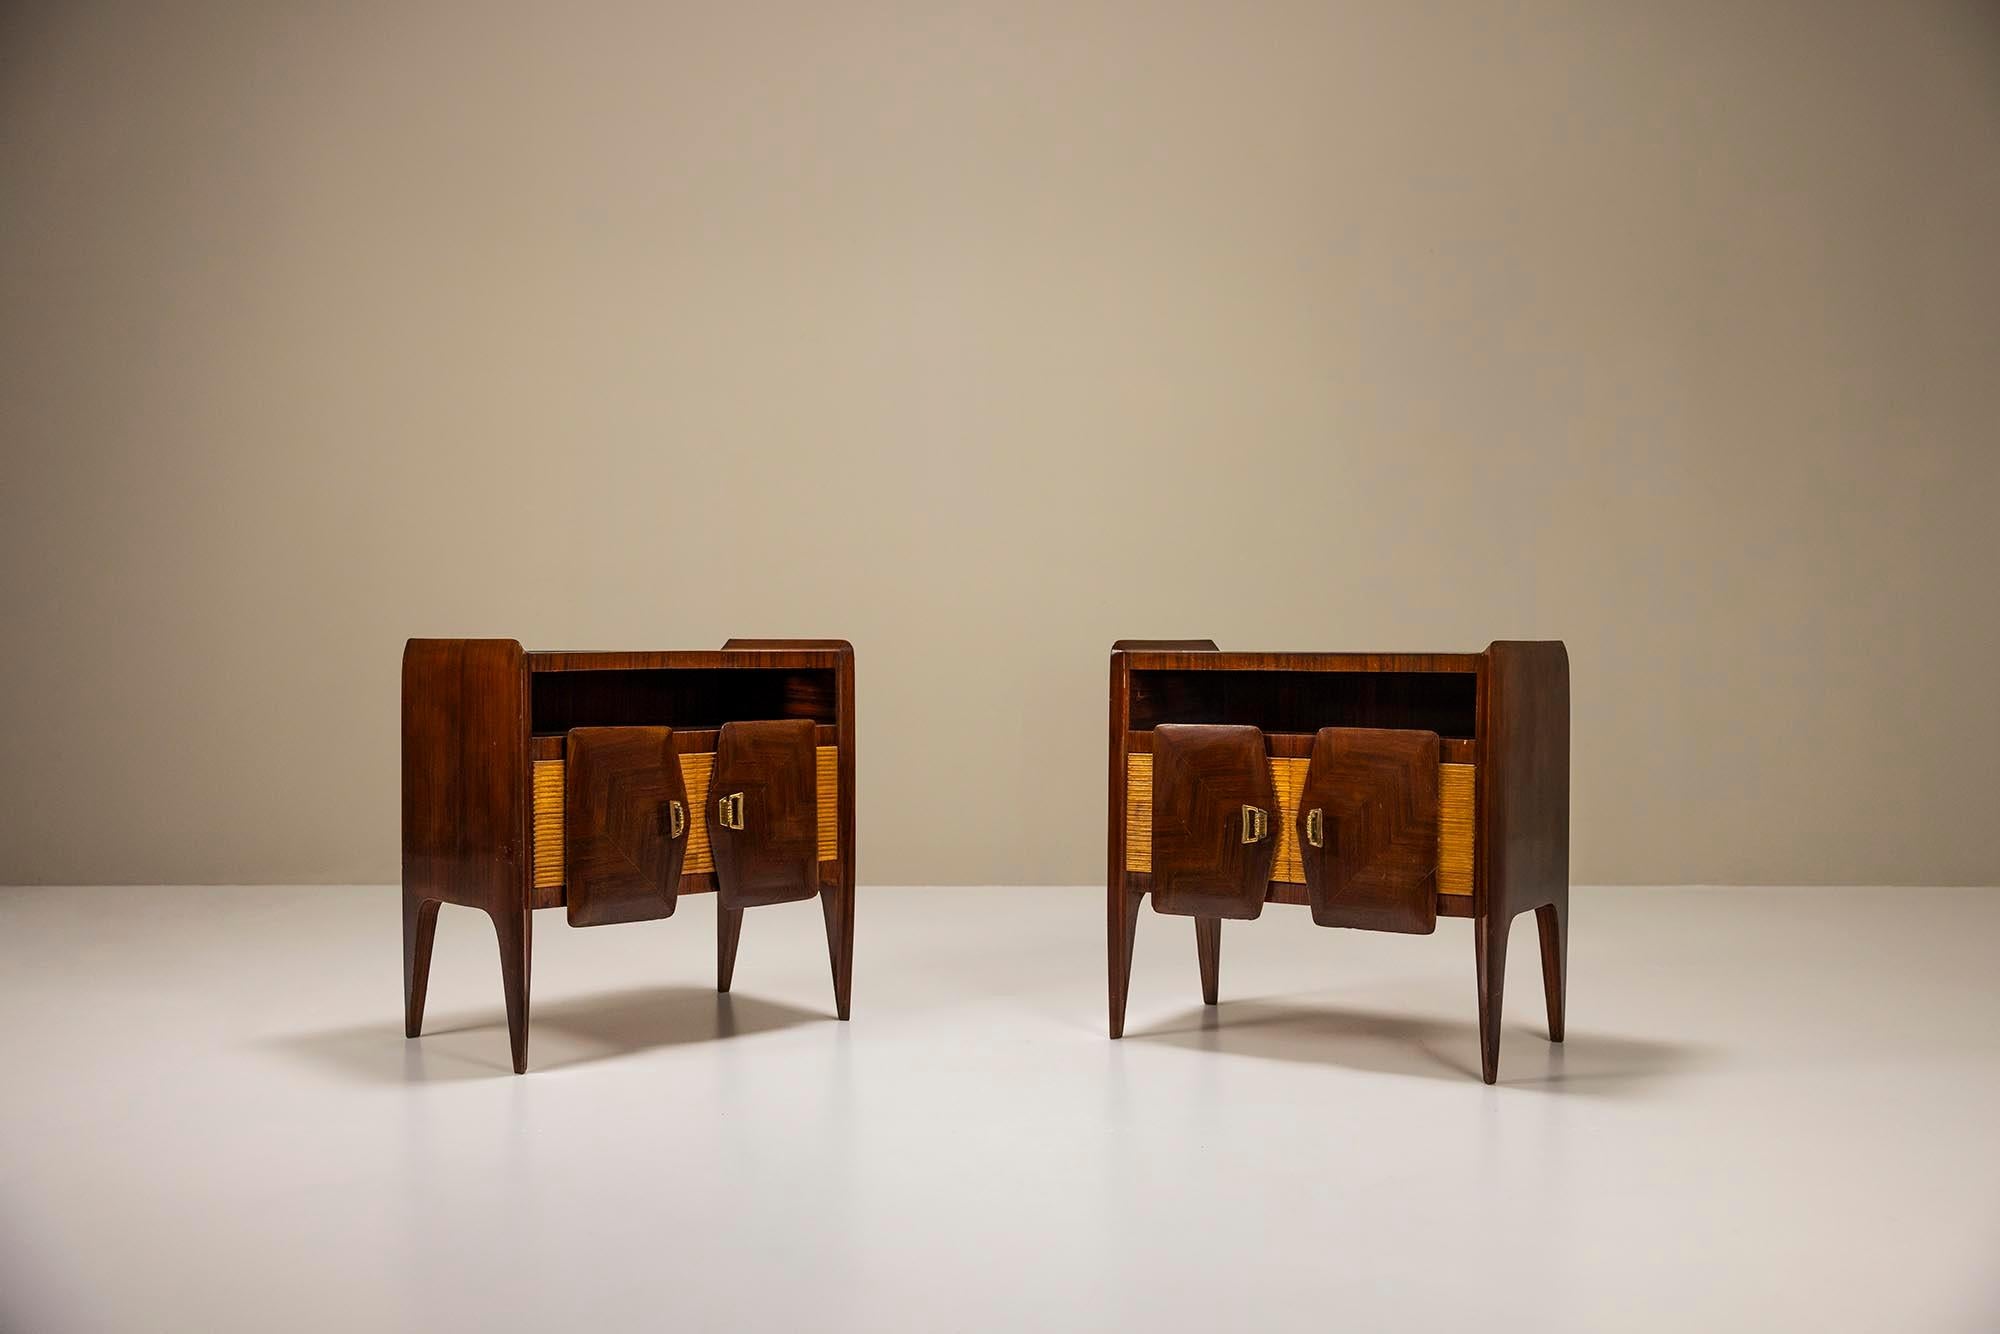 Nightstands veneered in rosewood and glass top in the manner of Borsani.These 1950s Italian bedside tables do not lack style or refinement. Sharp raised edges and a ribbed facade with overlapping door panels make one think in the direction of